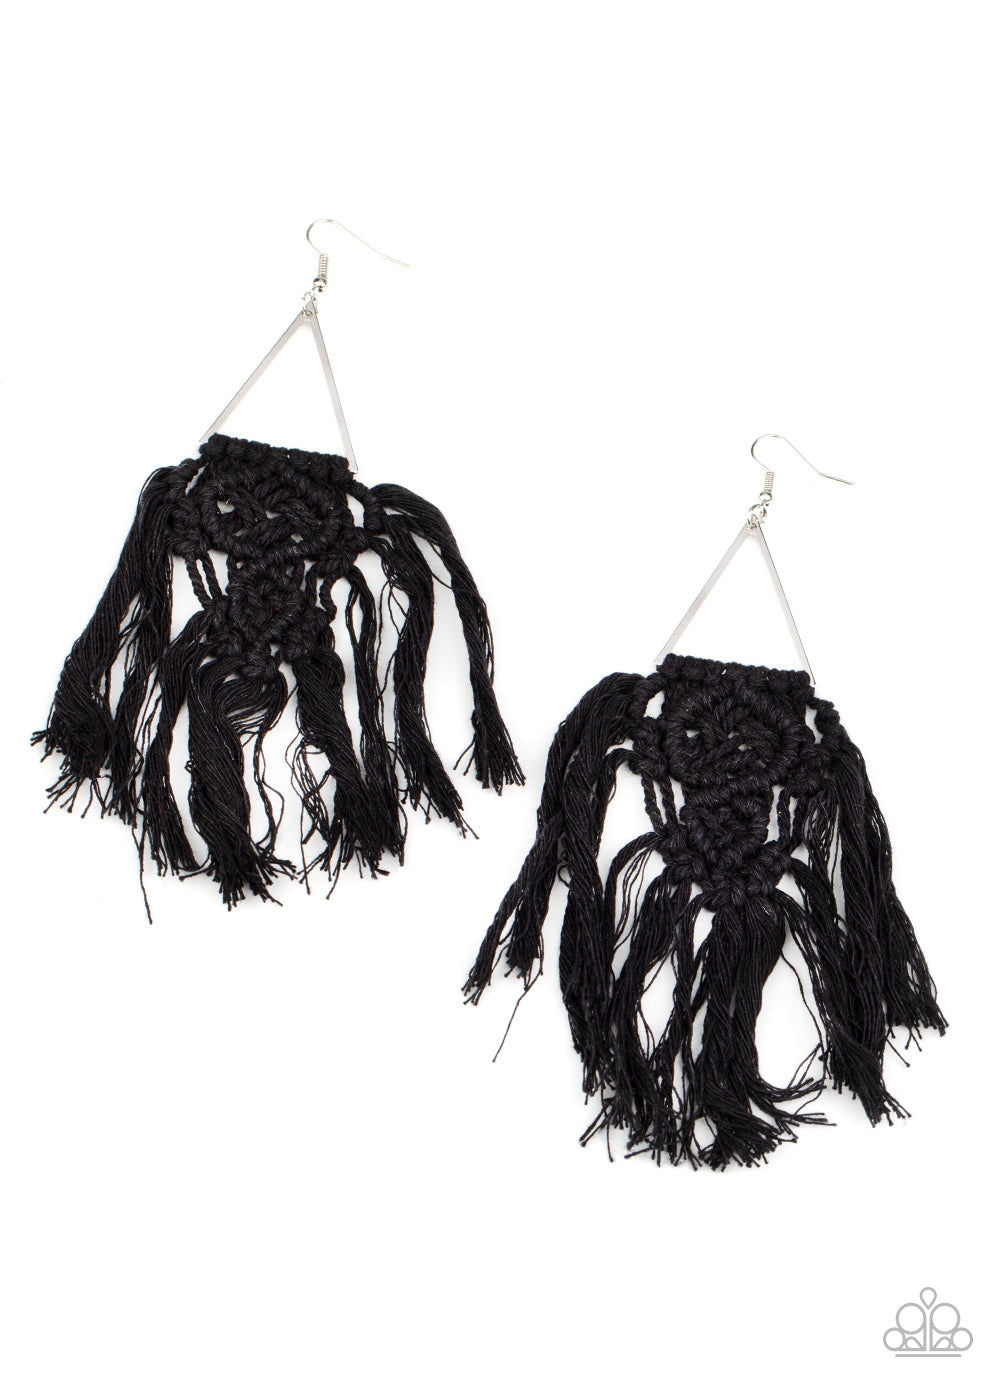 &lt;P&gt;Black threaded tassels ornately knot at the bottom of a shimmery silver triangular frame, creating a macramé inspired fringe. Earring attaches to a standard fishhook fitting.&lt;/P&gt;  

&lt;P&gt; &lt;I&gt;  Sold as one pair of earrings. &lt;/I&gt;  &lt;/P&gt;

&lt;img src=\&quot;https://d9b54x484lq62.cloudfront.net/paparazzi/shopping/images/517_tag150x115_1.png\&quot; alt=\&quot;New Kit\&quot; align=\&quot;middle\&quot; height=\&quot;50\&quot; width=\&quot;50\&quot;/&gt;